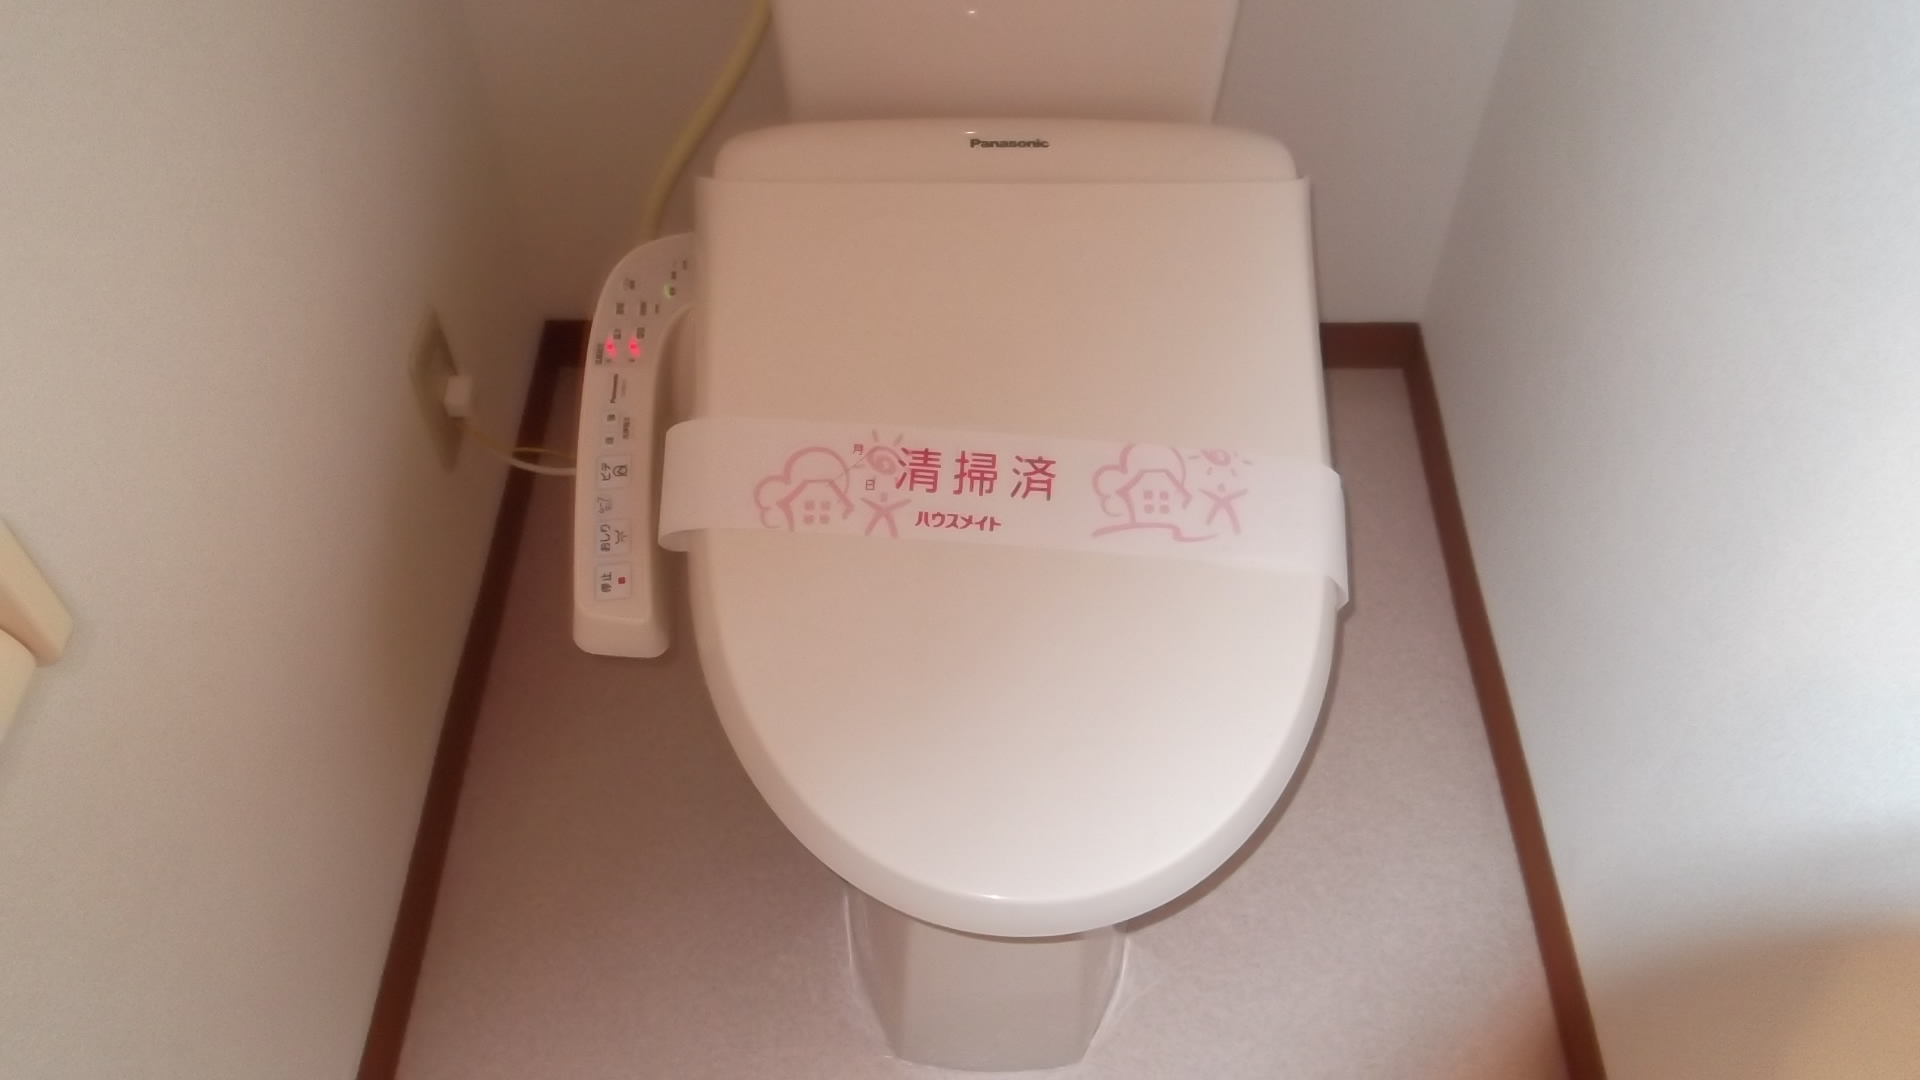 Toilet. Newly established! It comes with cleaning function